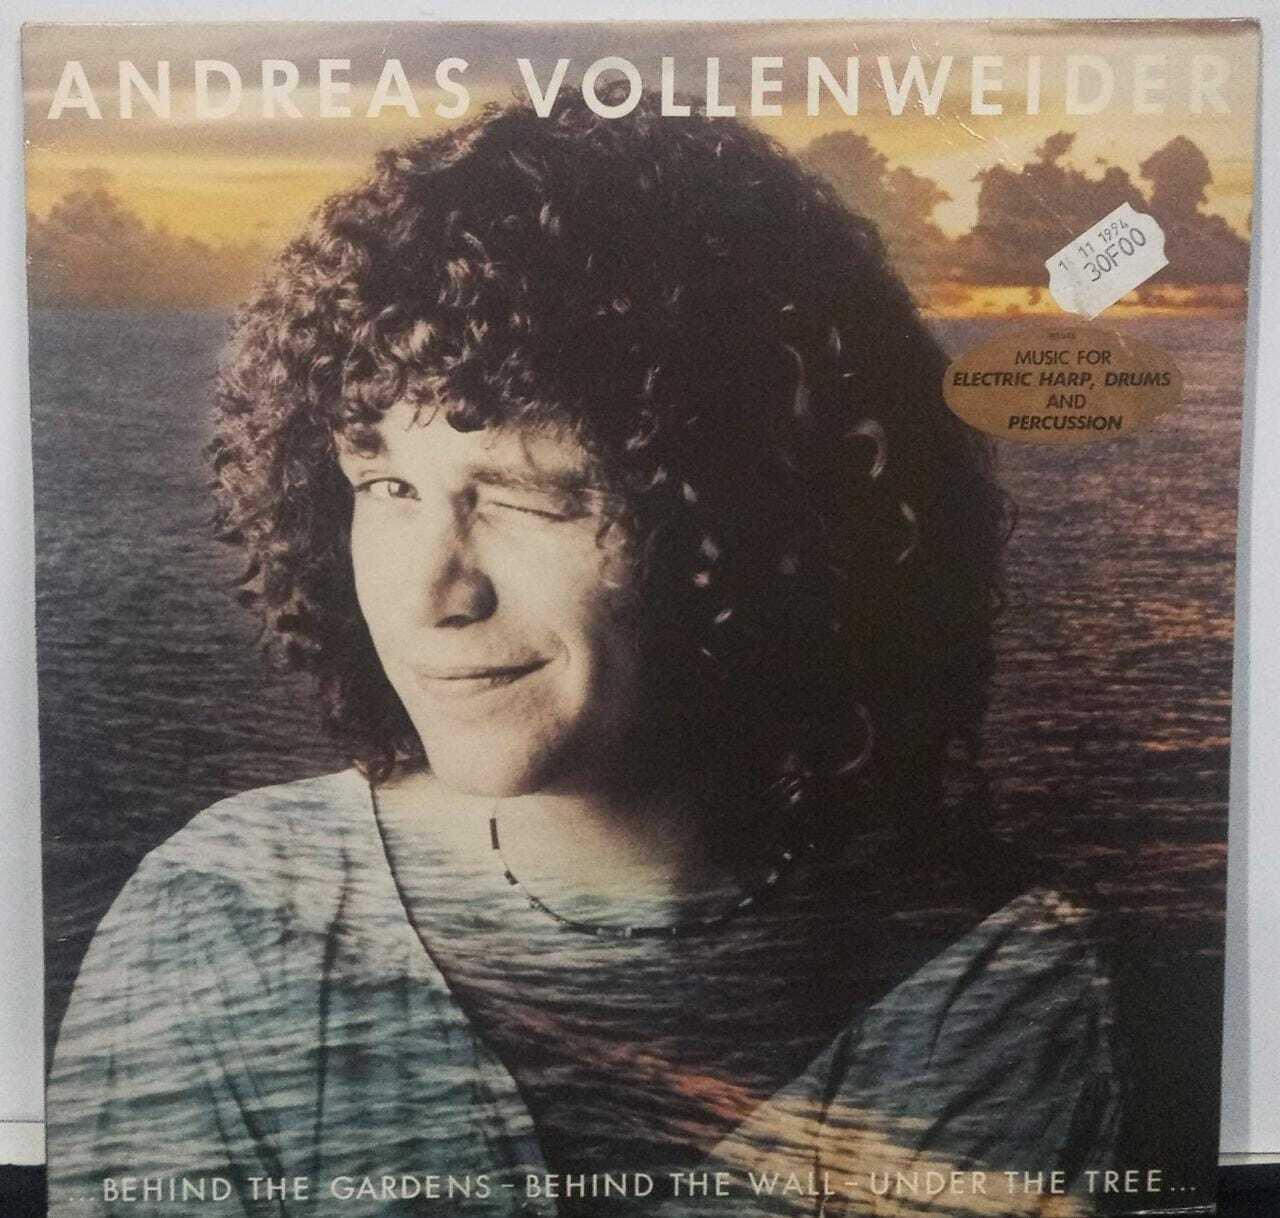 Vinil - Andreas Vollenweider - Behind The Gardens Behind The Wall - Under The Tree (EU)